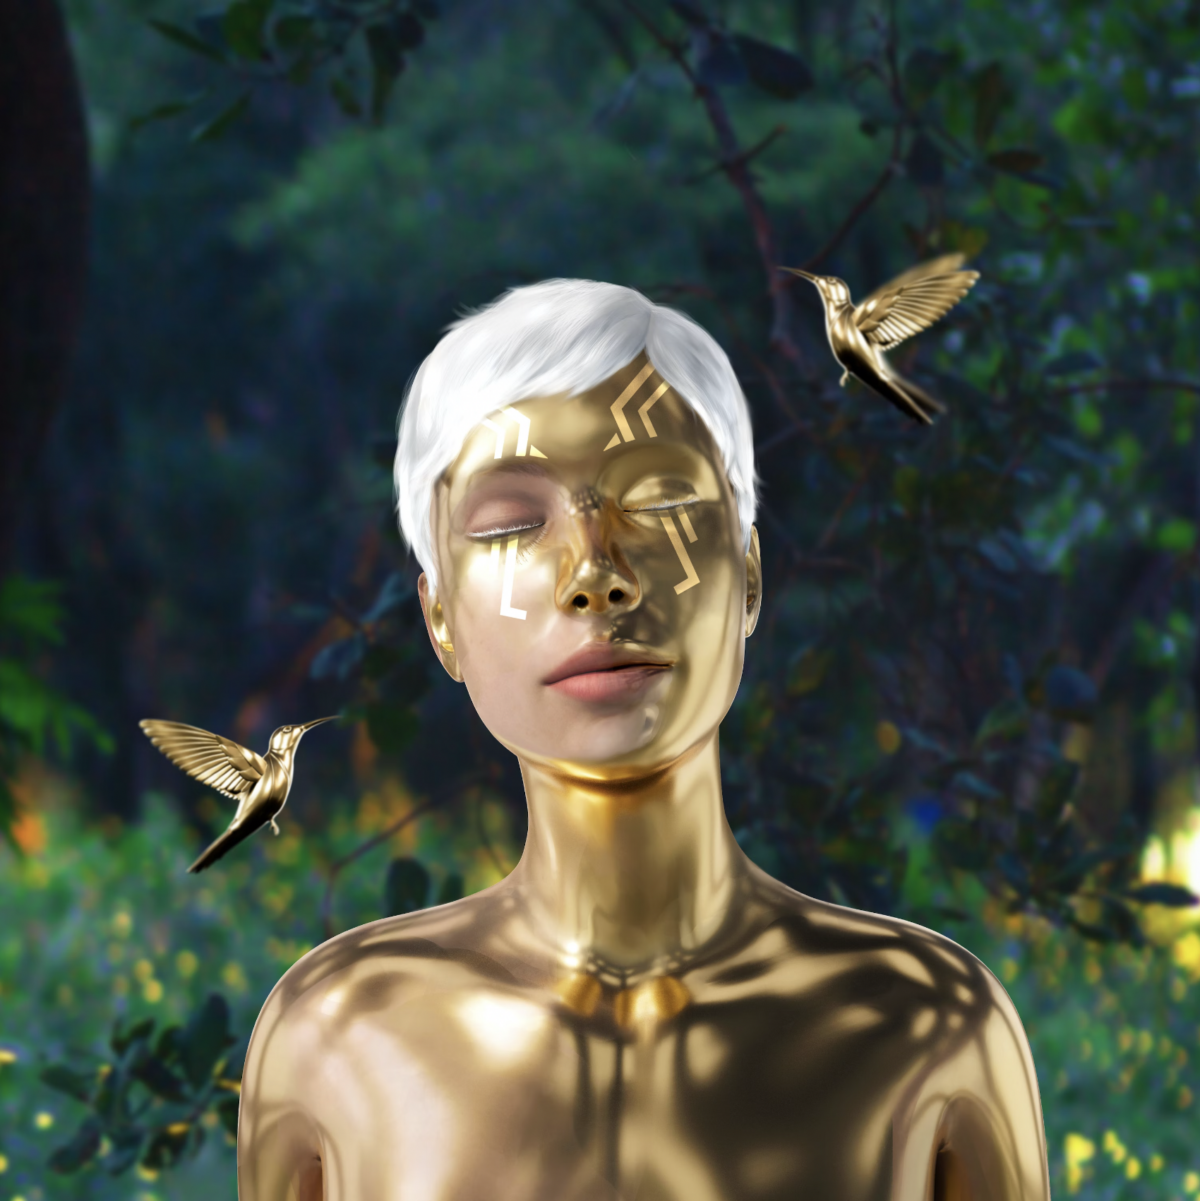 golden woman with white hair surrounded by a forest scene